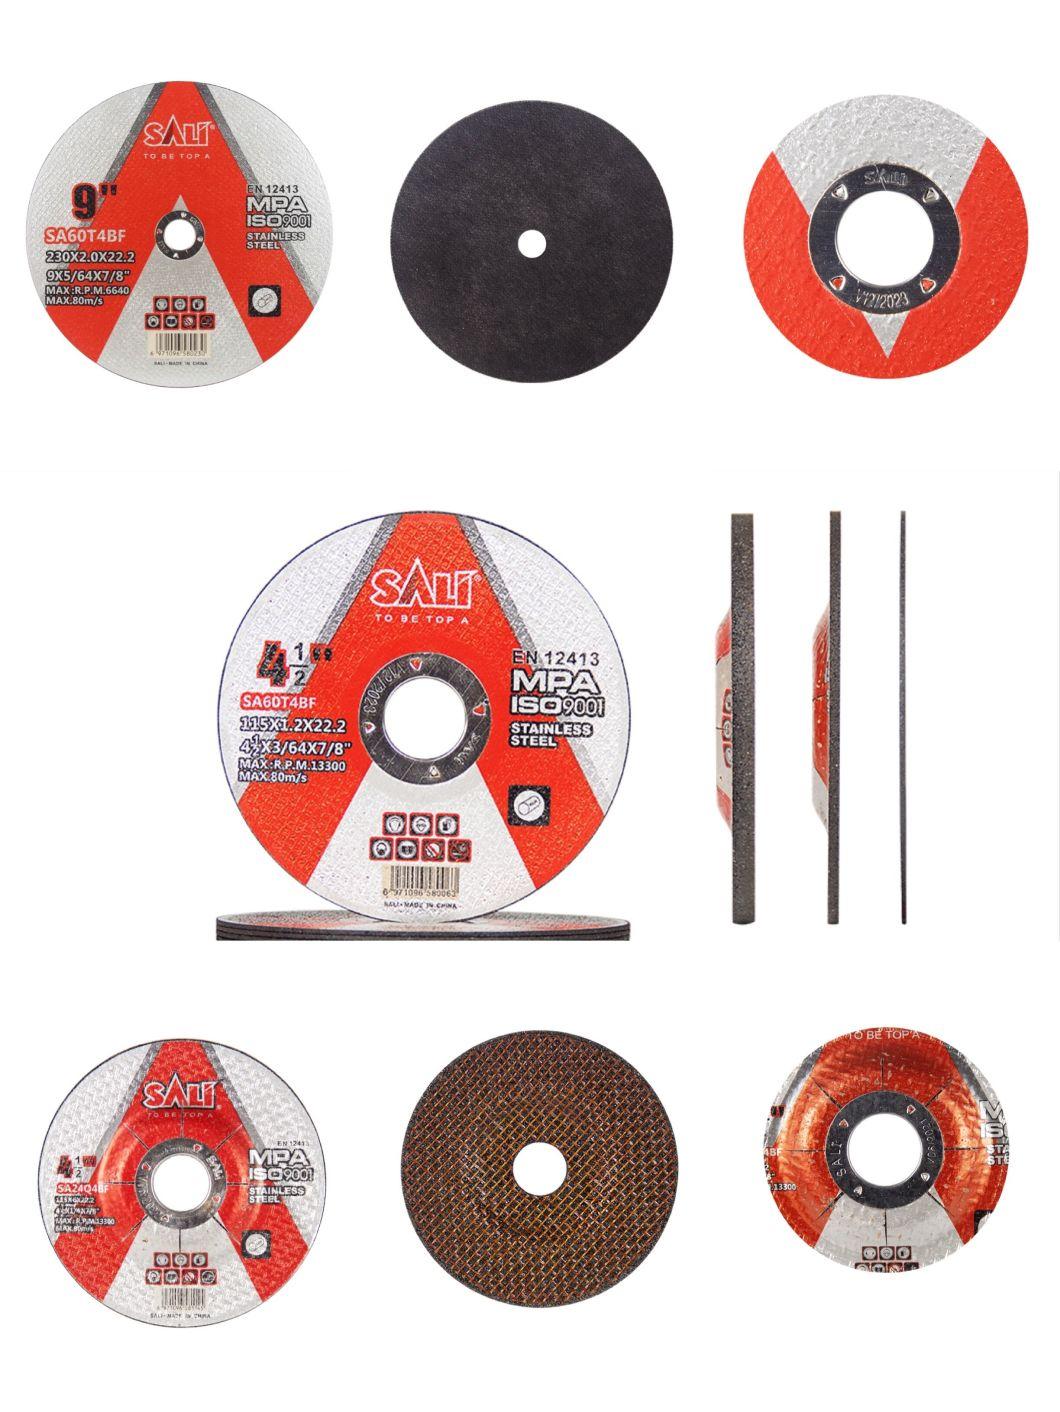 Sali 14inch 355*3.2*25.4mm Professonal Quality Stainless Steel Cutting Disc